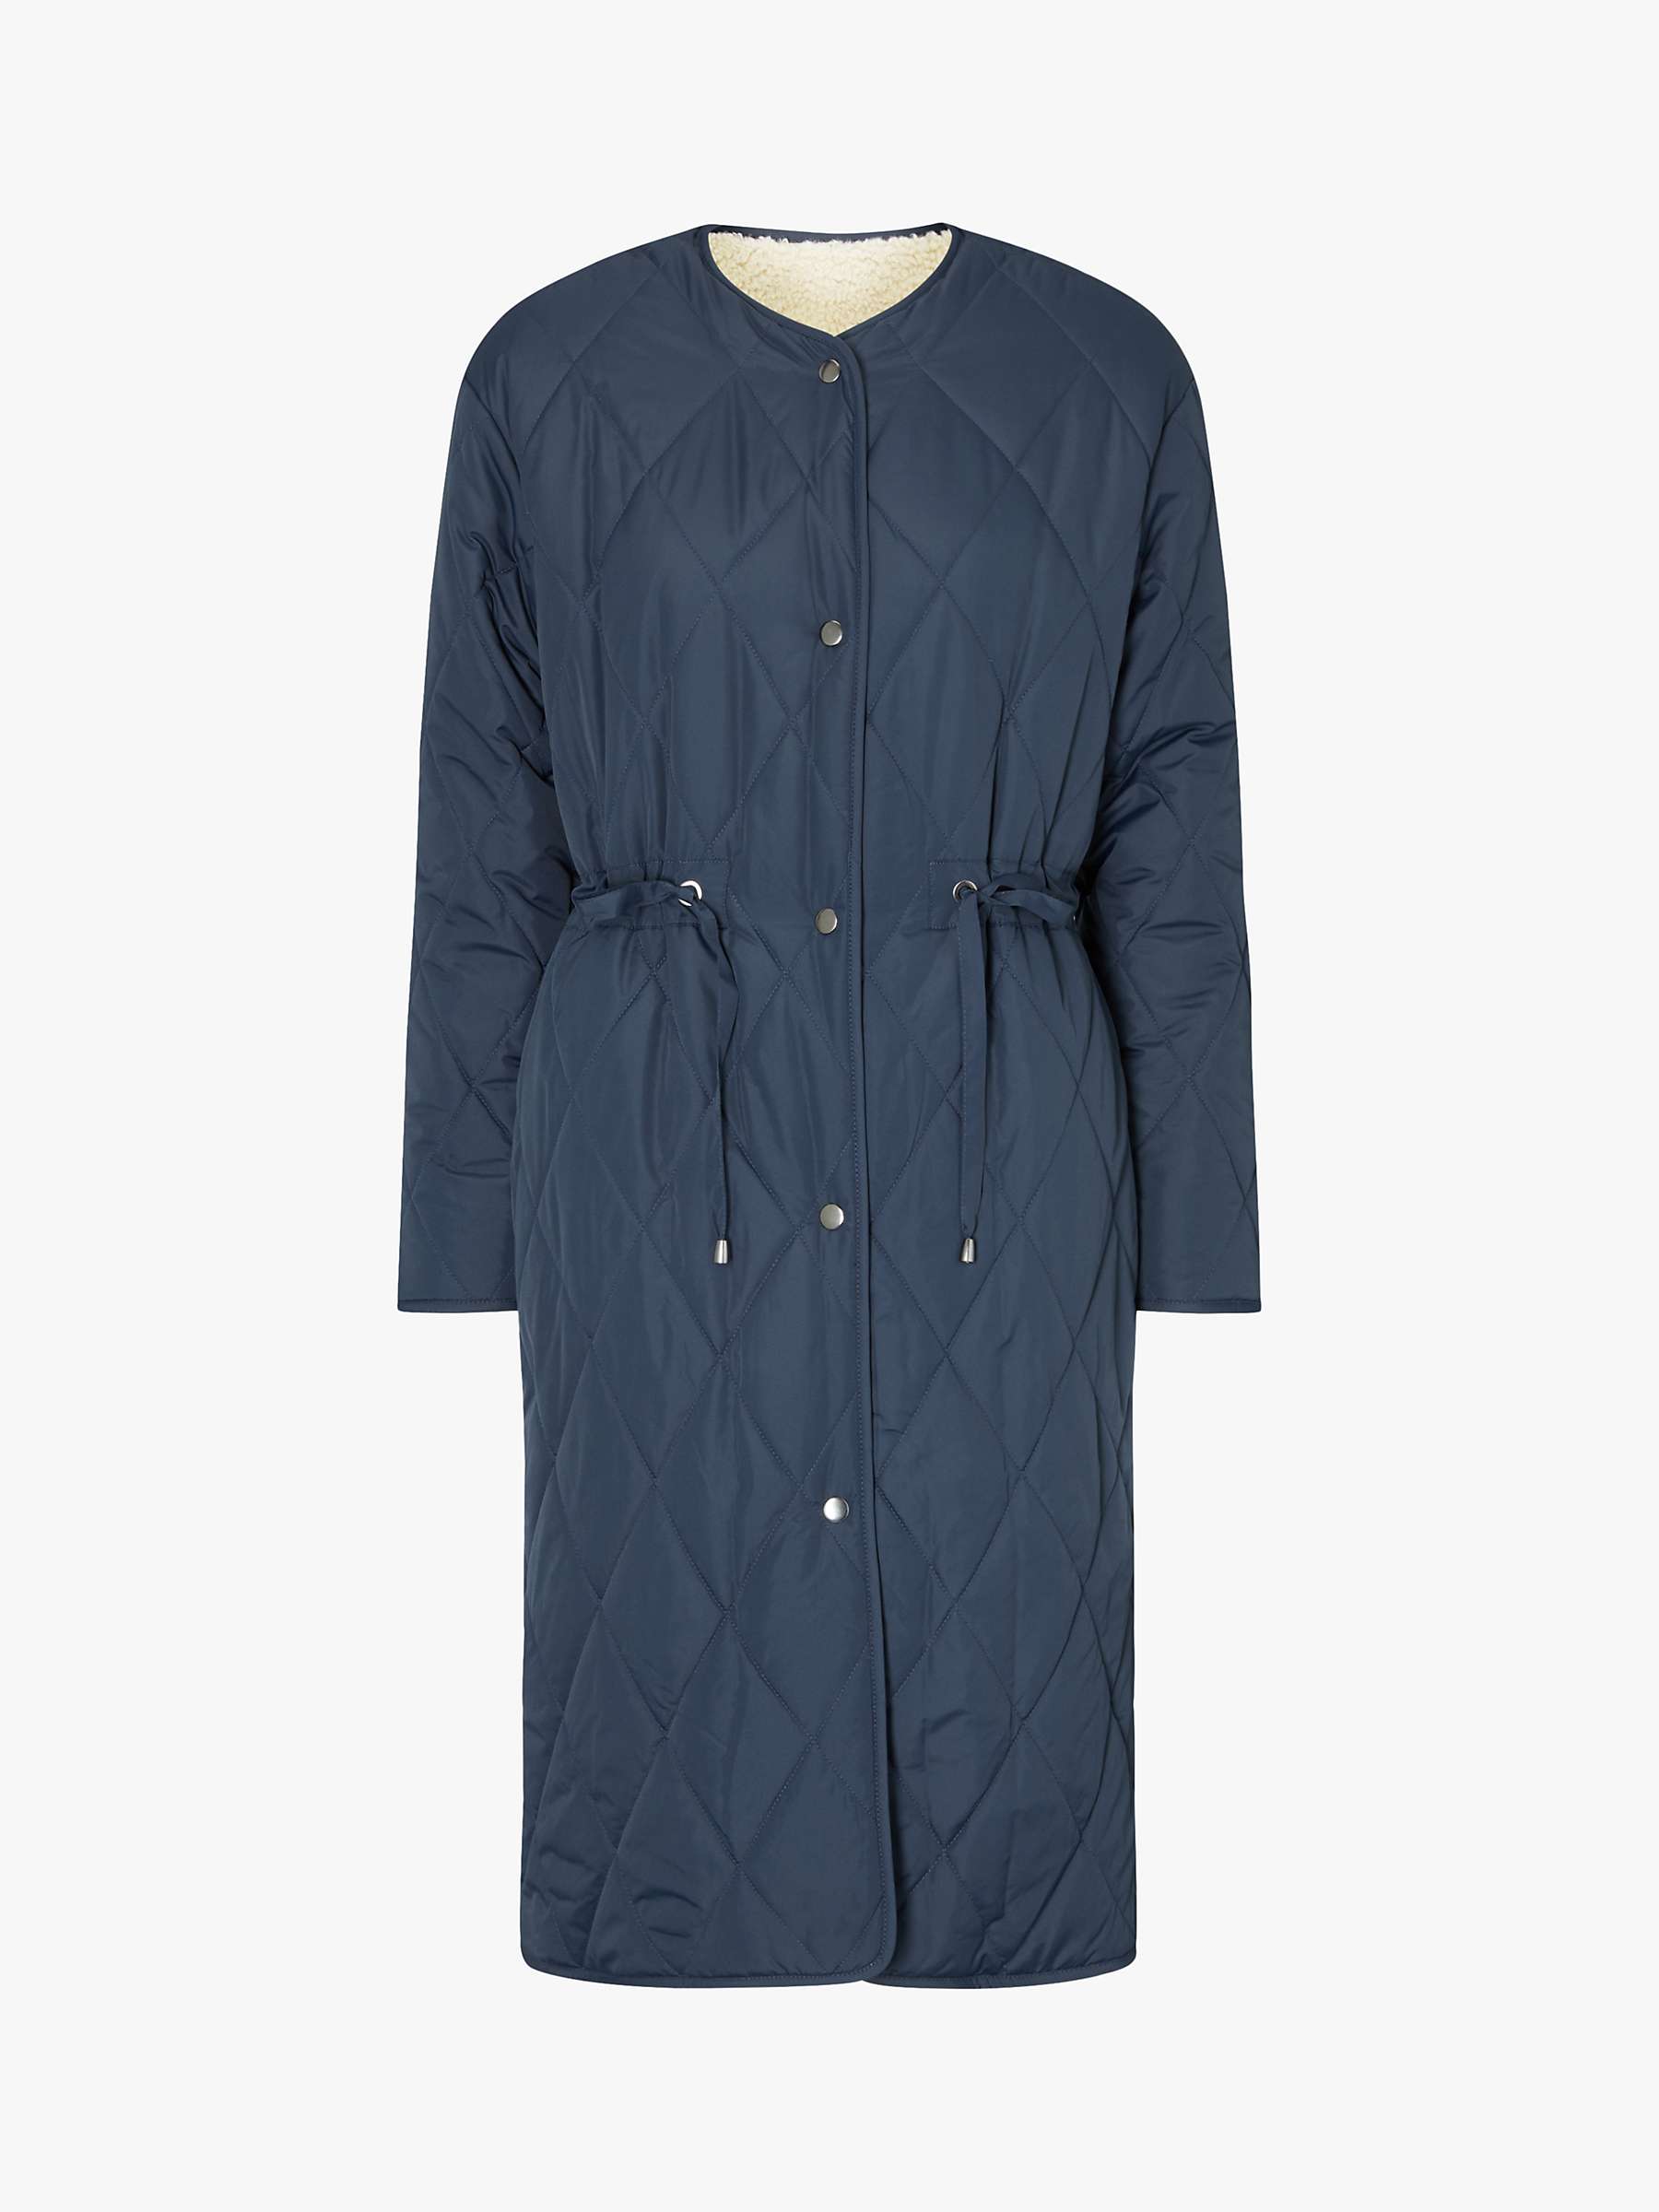 Buy Four Seasons Reversible Collarless Borg Quilted Coat, Navy Online at johnlewis.com